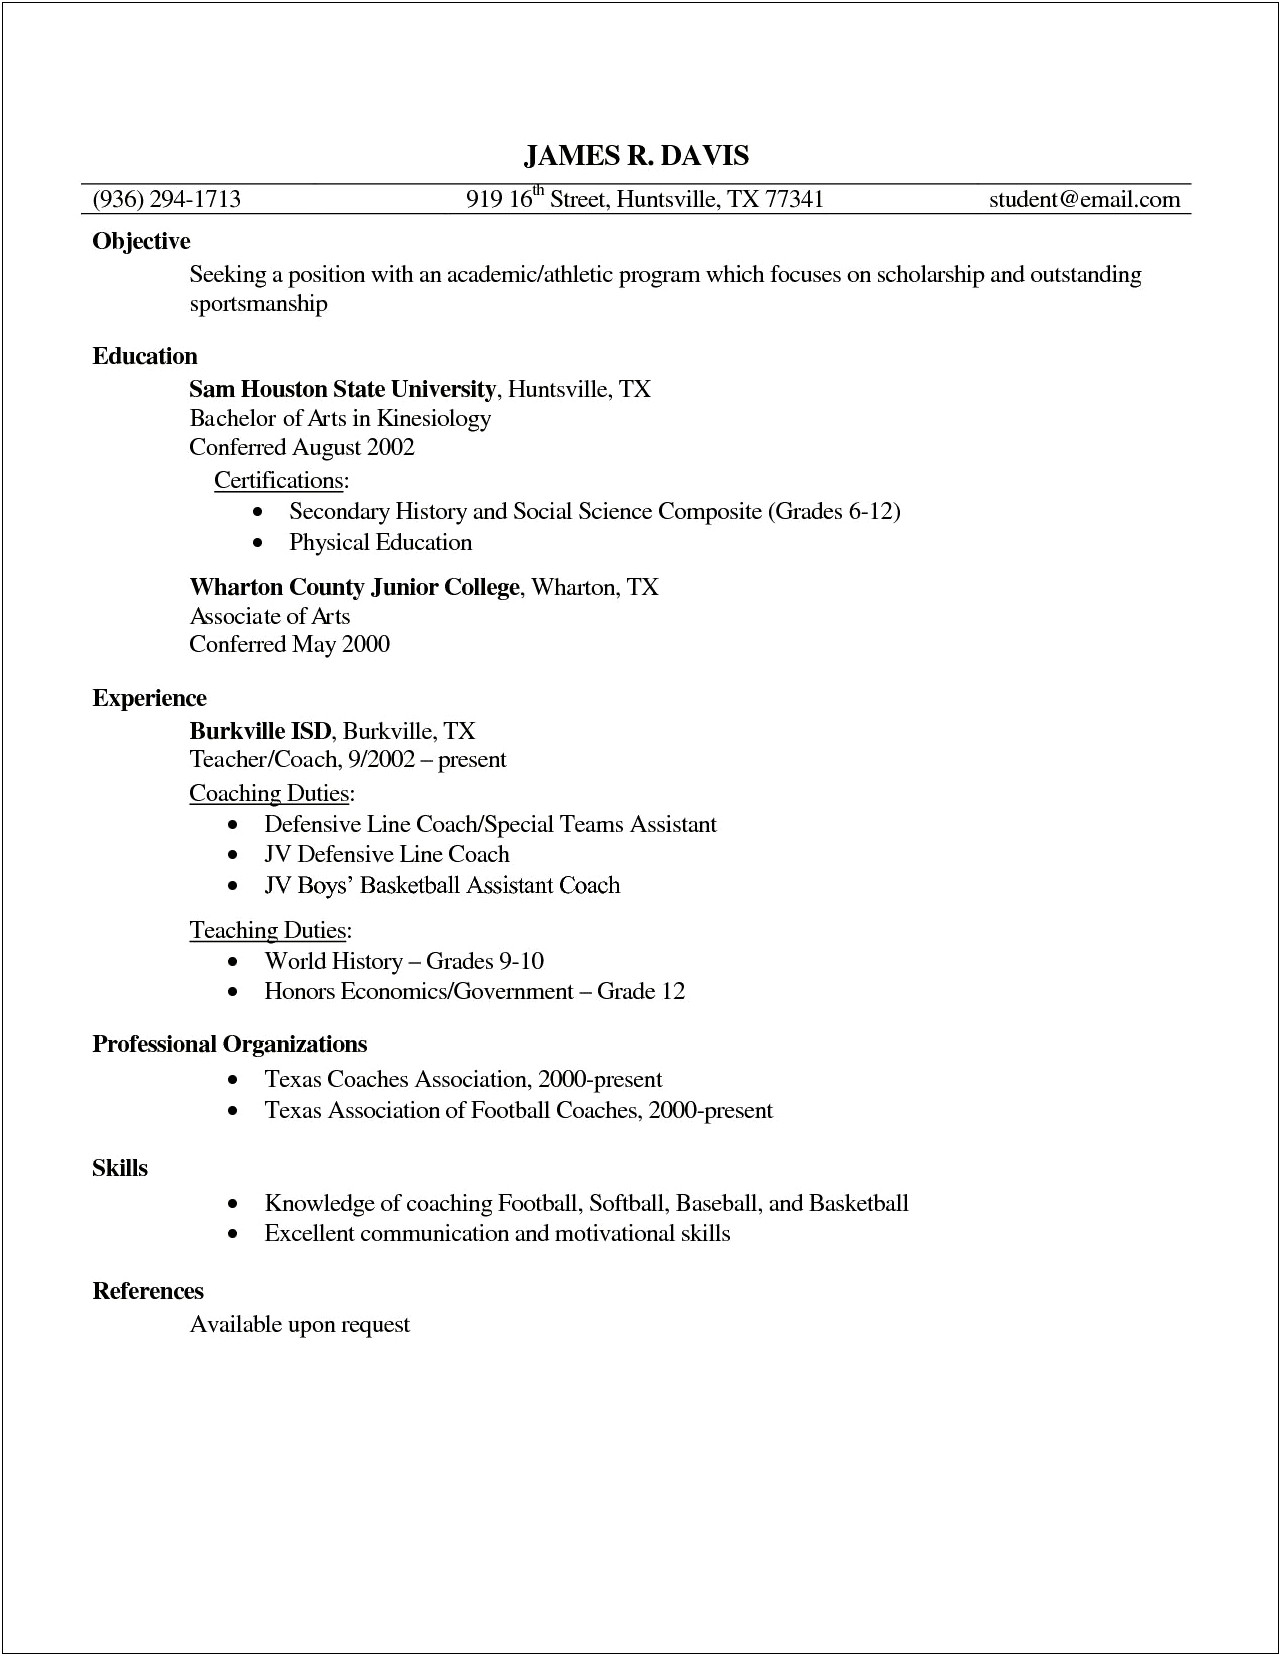 Professional Footbal Coach Resume Examples